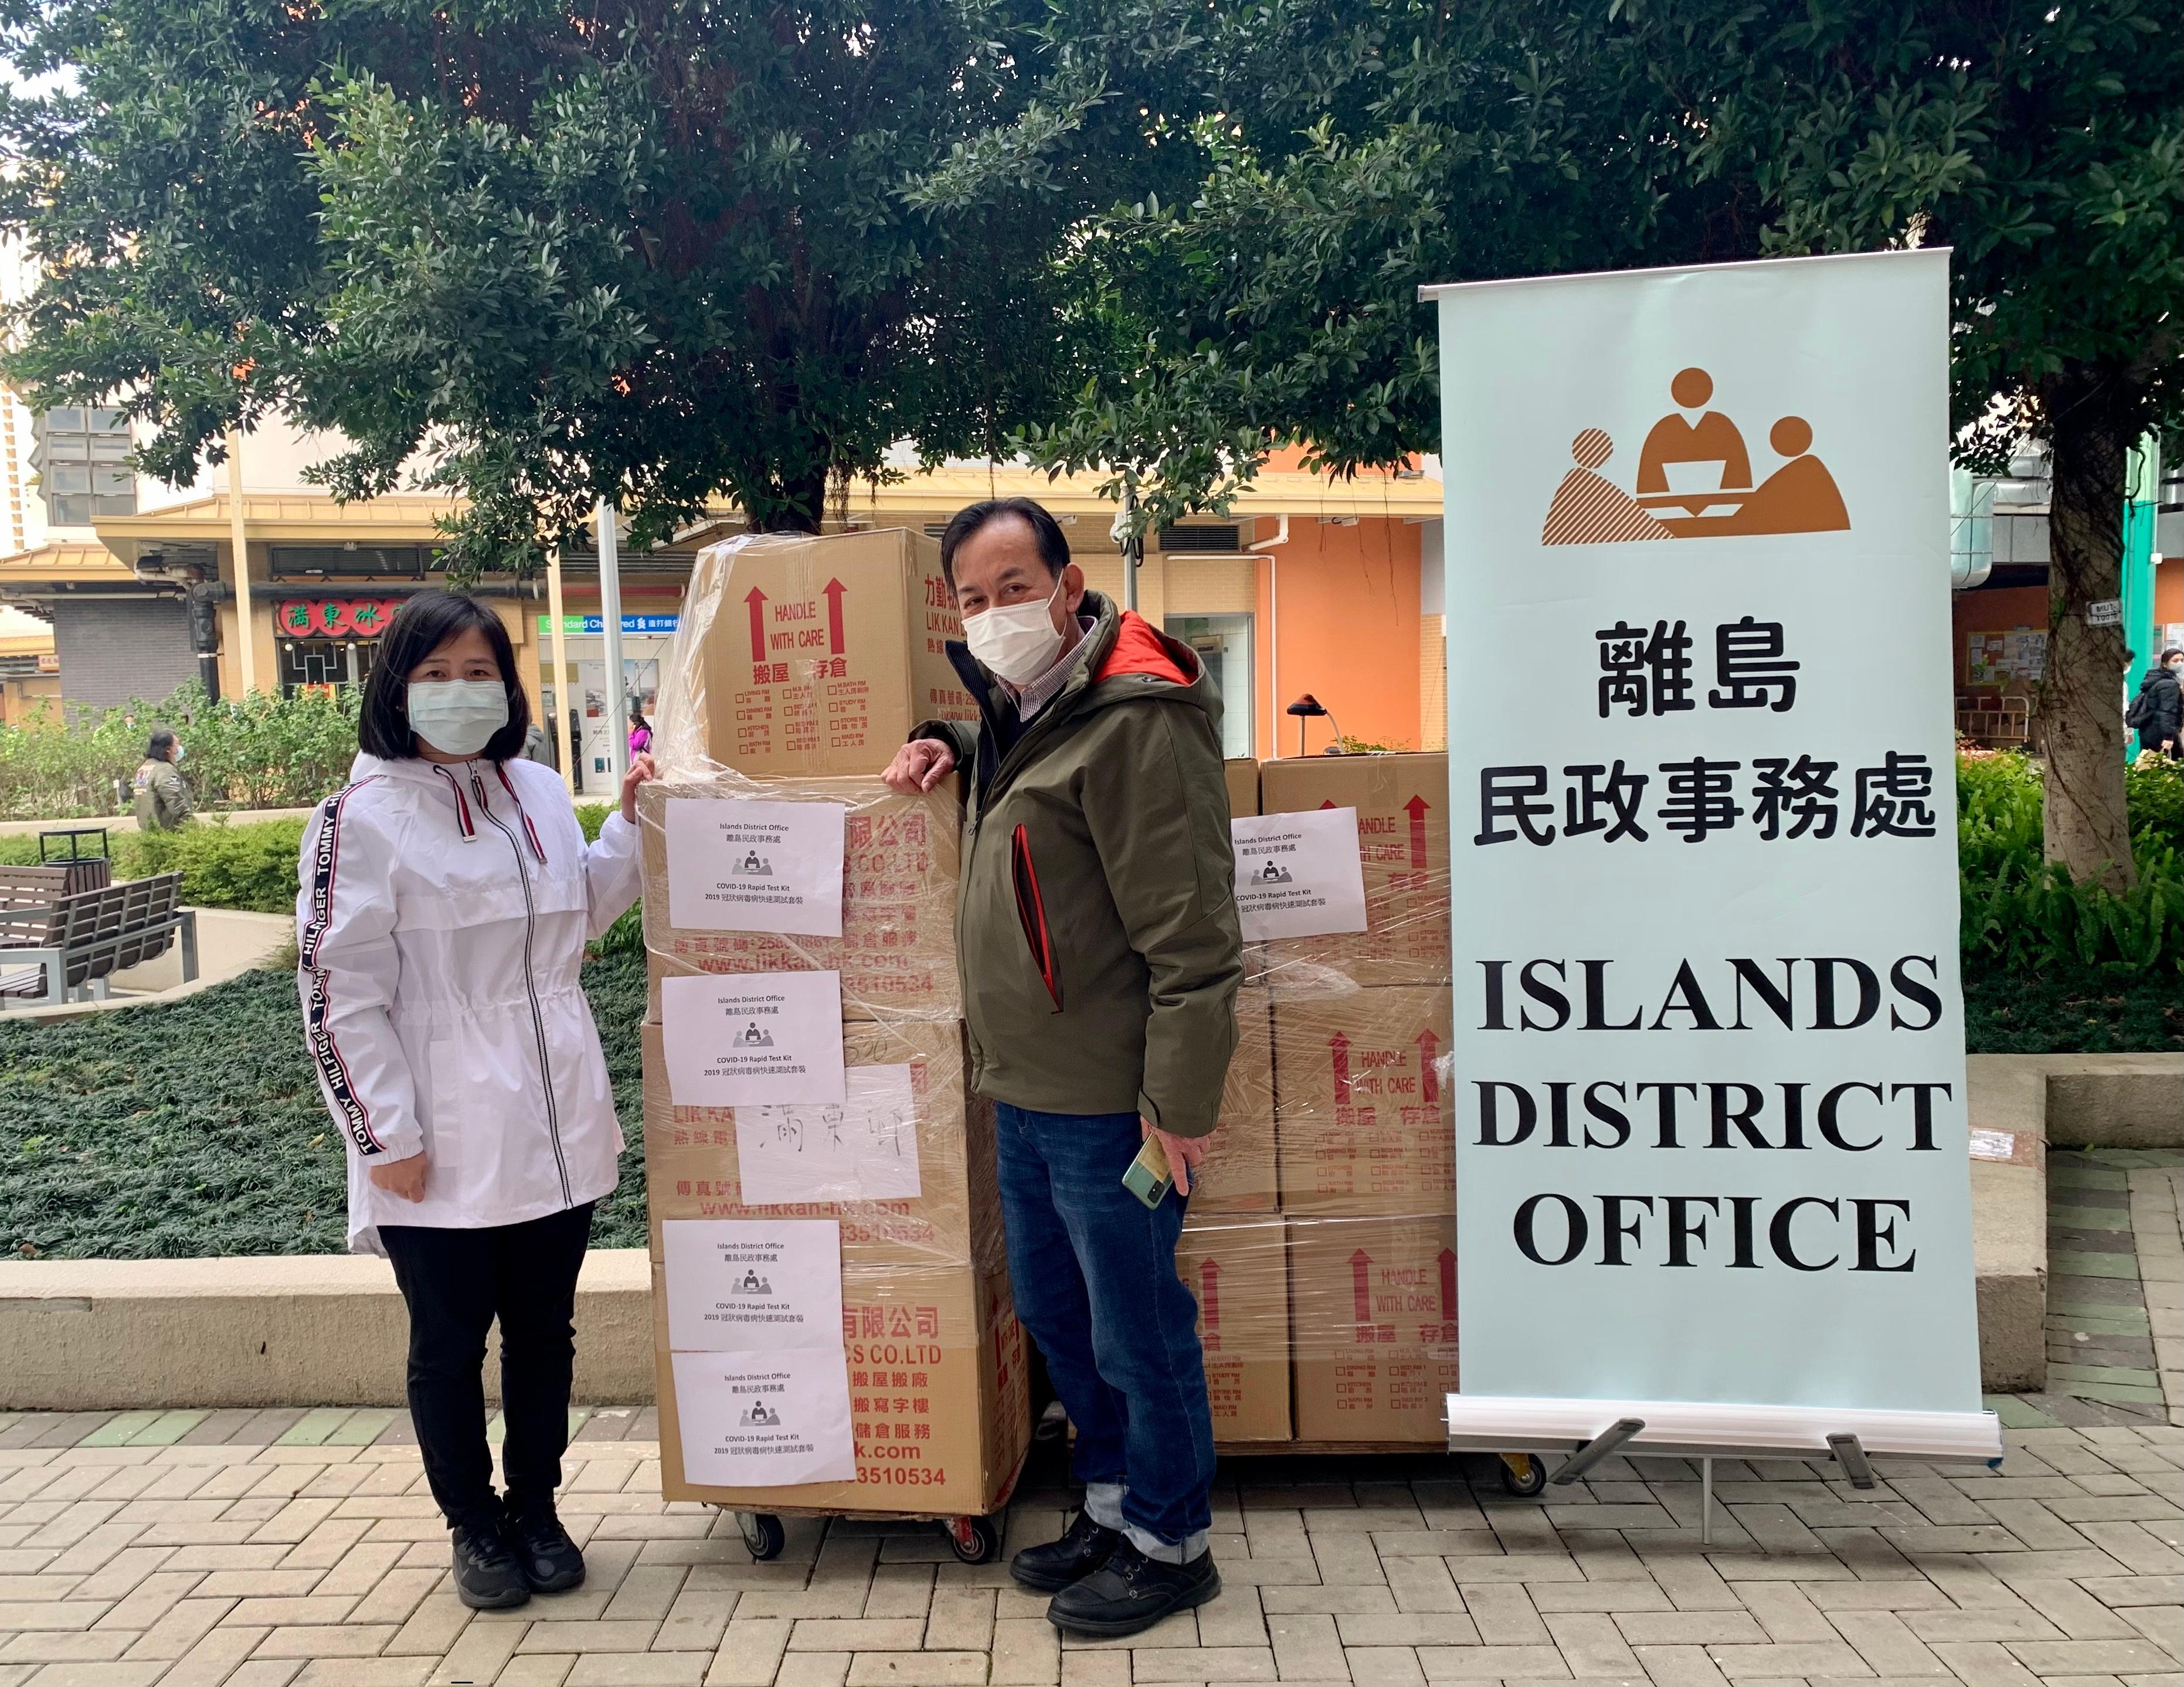 The Islands District Office today (March 3) distributed COVID-19 rapid test kits to households, cleansing workers and property management staff living and working in Mun Tung Estate, Tung Chung, for voluntary testing through the property management company.